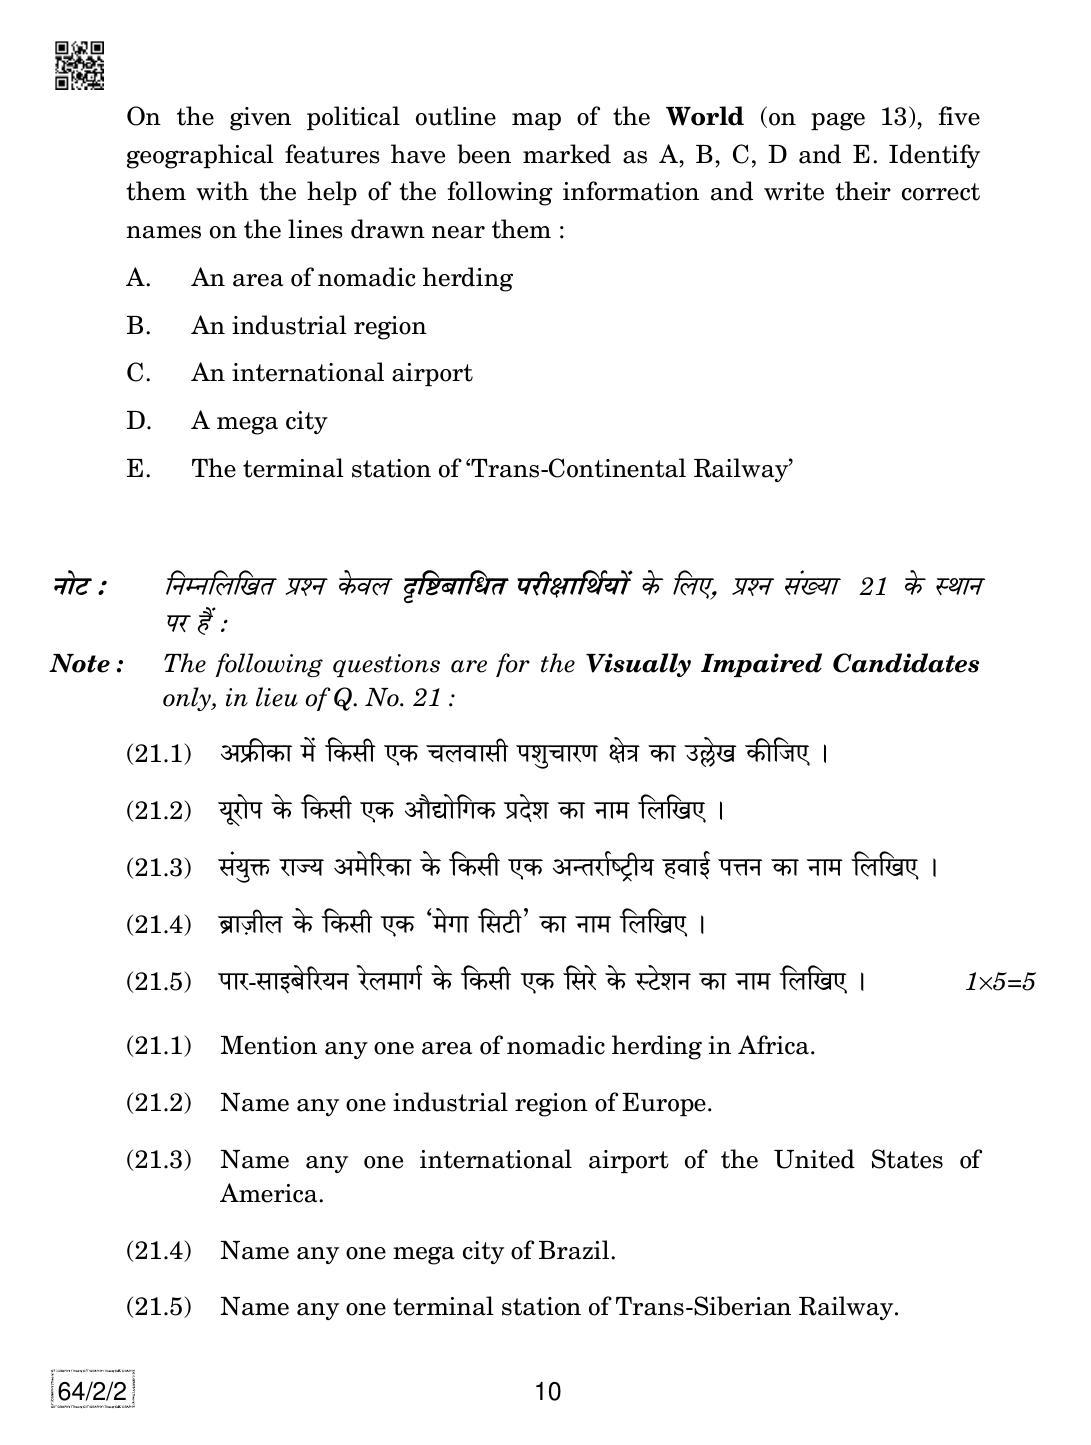 CBSE Class 12 64-2-2 Geography 2019 Question Paper - Page 10